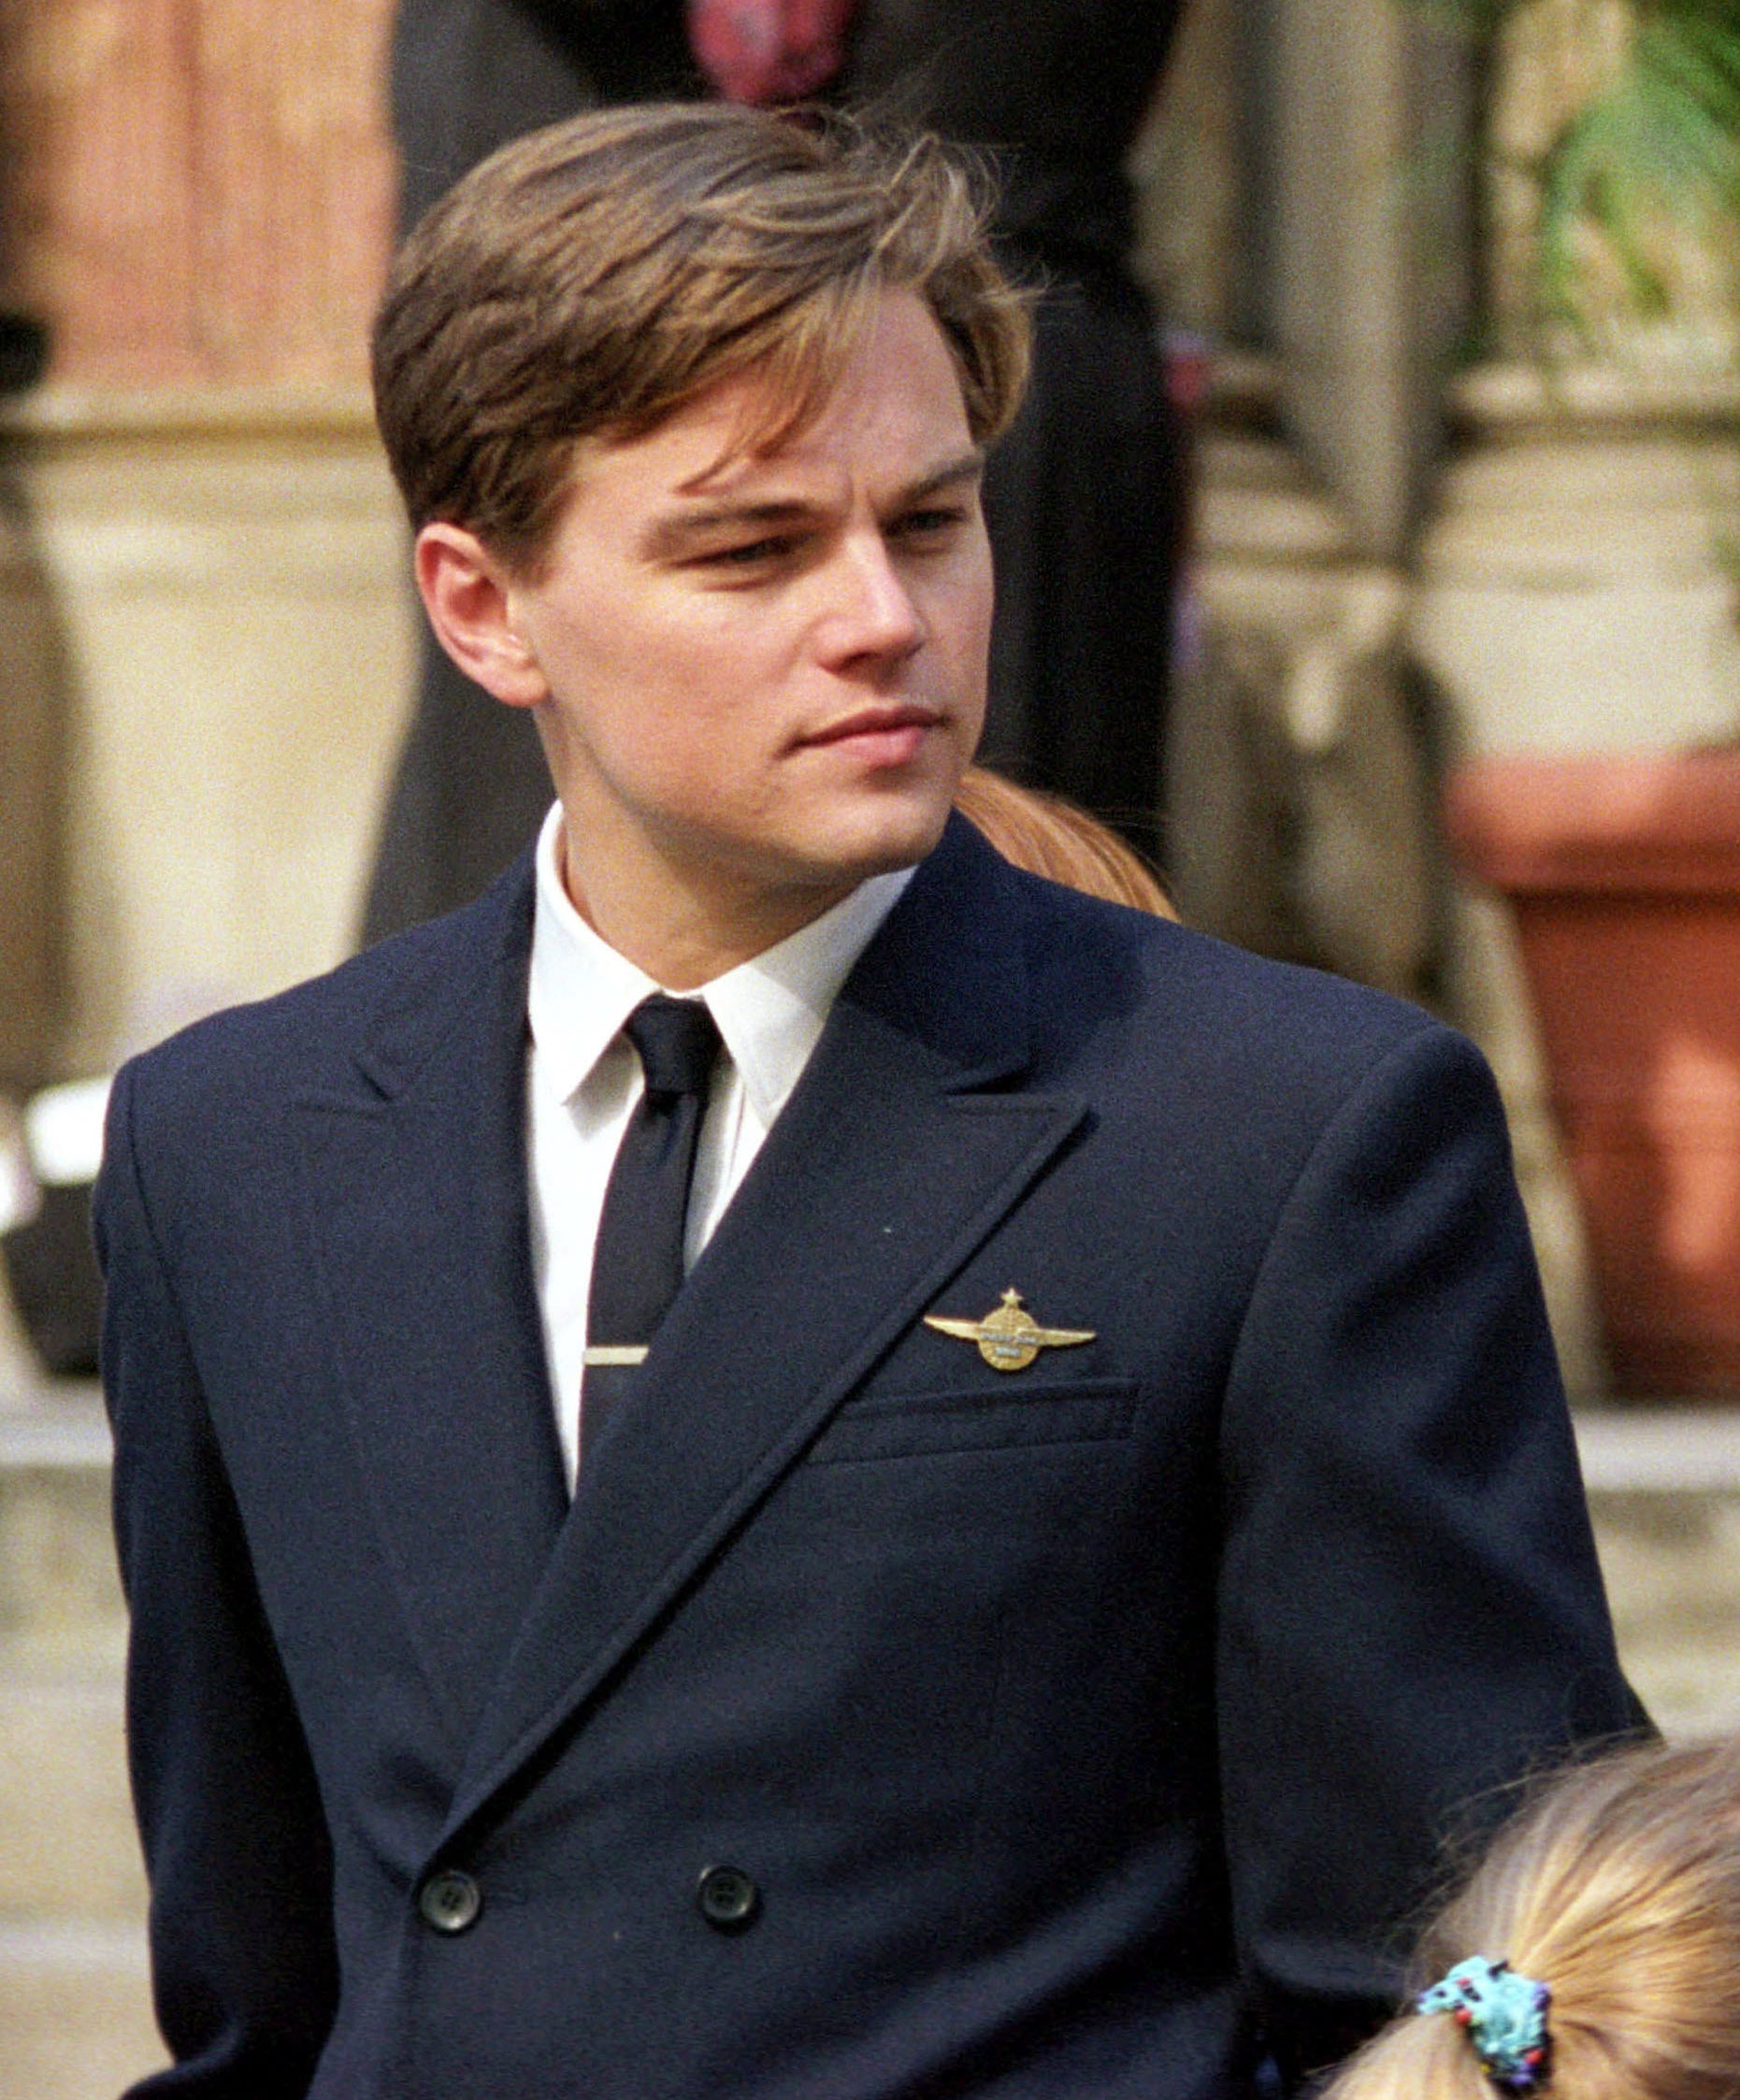 Leonardo DiCaprio on set filming Catch Me If You Can